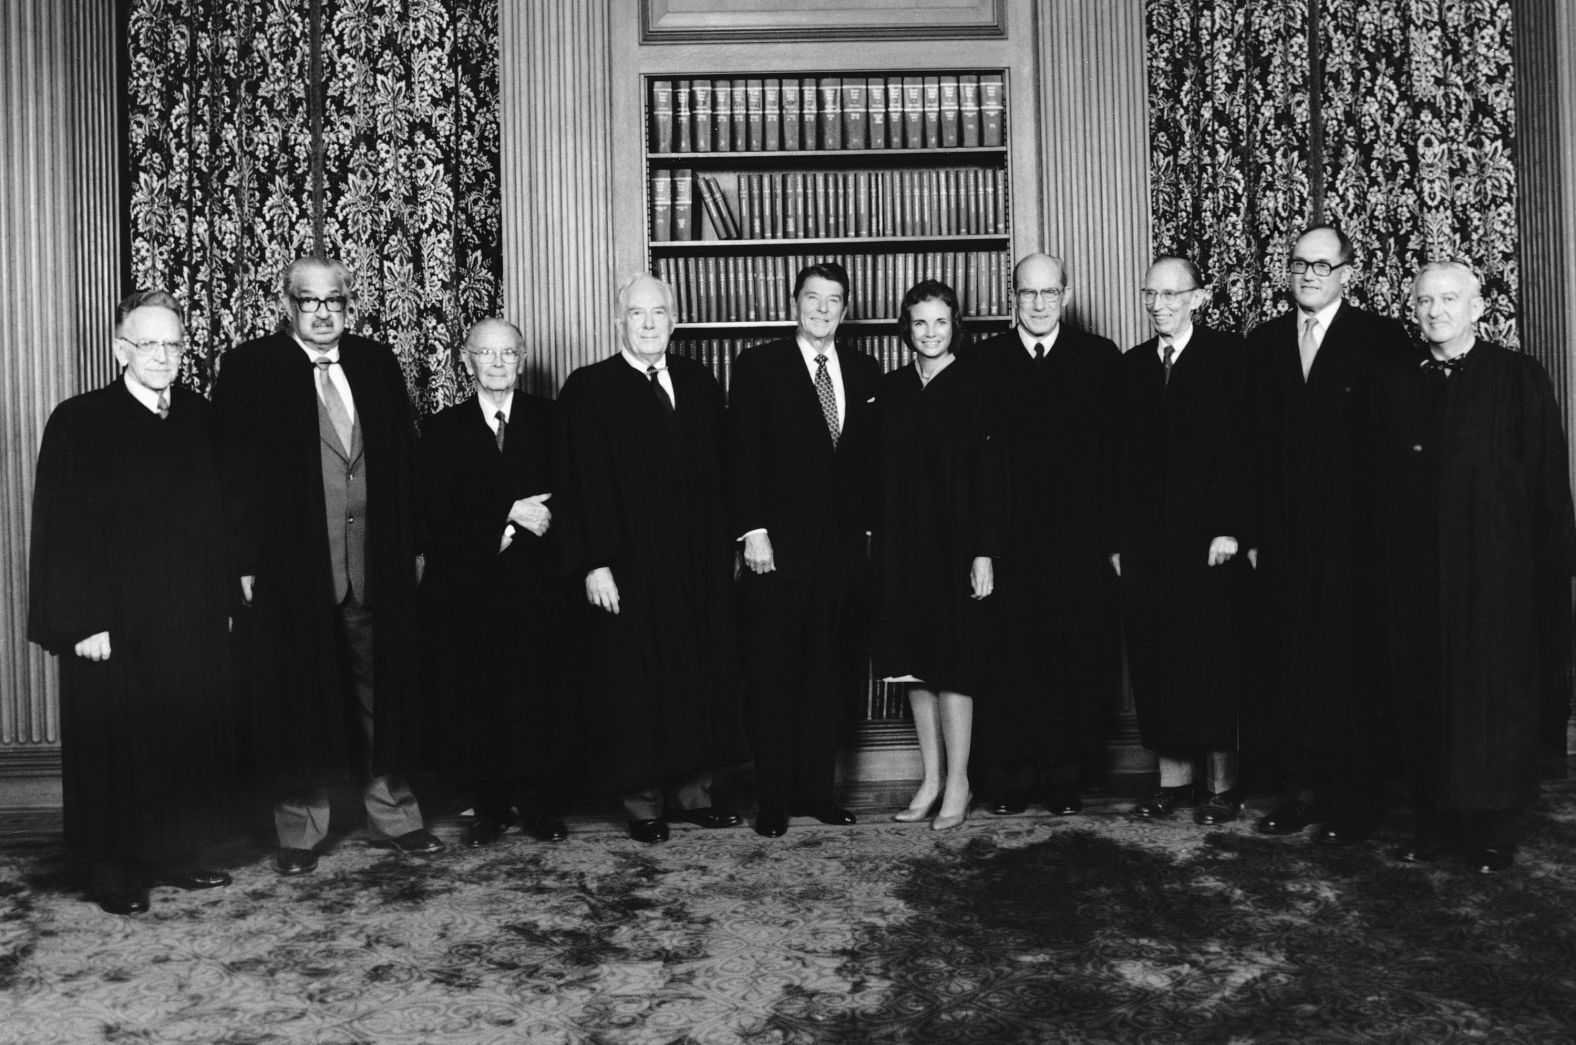 In this photo provided by the White House, the nine justices of the Supreme Court, including the newly sworn-in Sandra Day O'Connor, pose with President Reagan in the conference room of the Supreme Court on September 25, 1981. From left are Harry A. Blackmun, Thurgood Marshall, William J. Brennan, Chief Justice Warren Burger, President Reagan, O'Connor, Byron White, Lewis Powell, William Rehnquist and Stevens. 